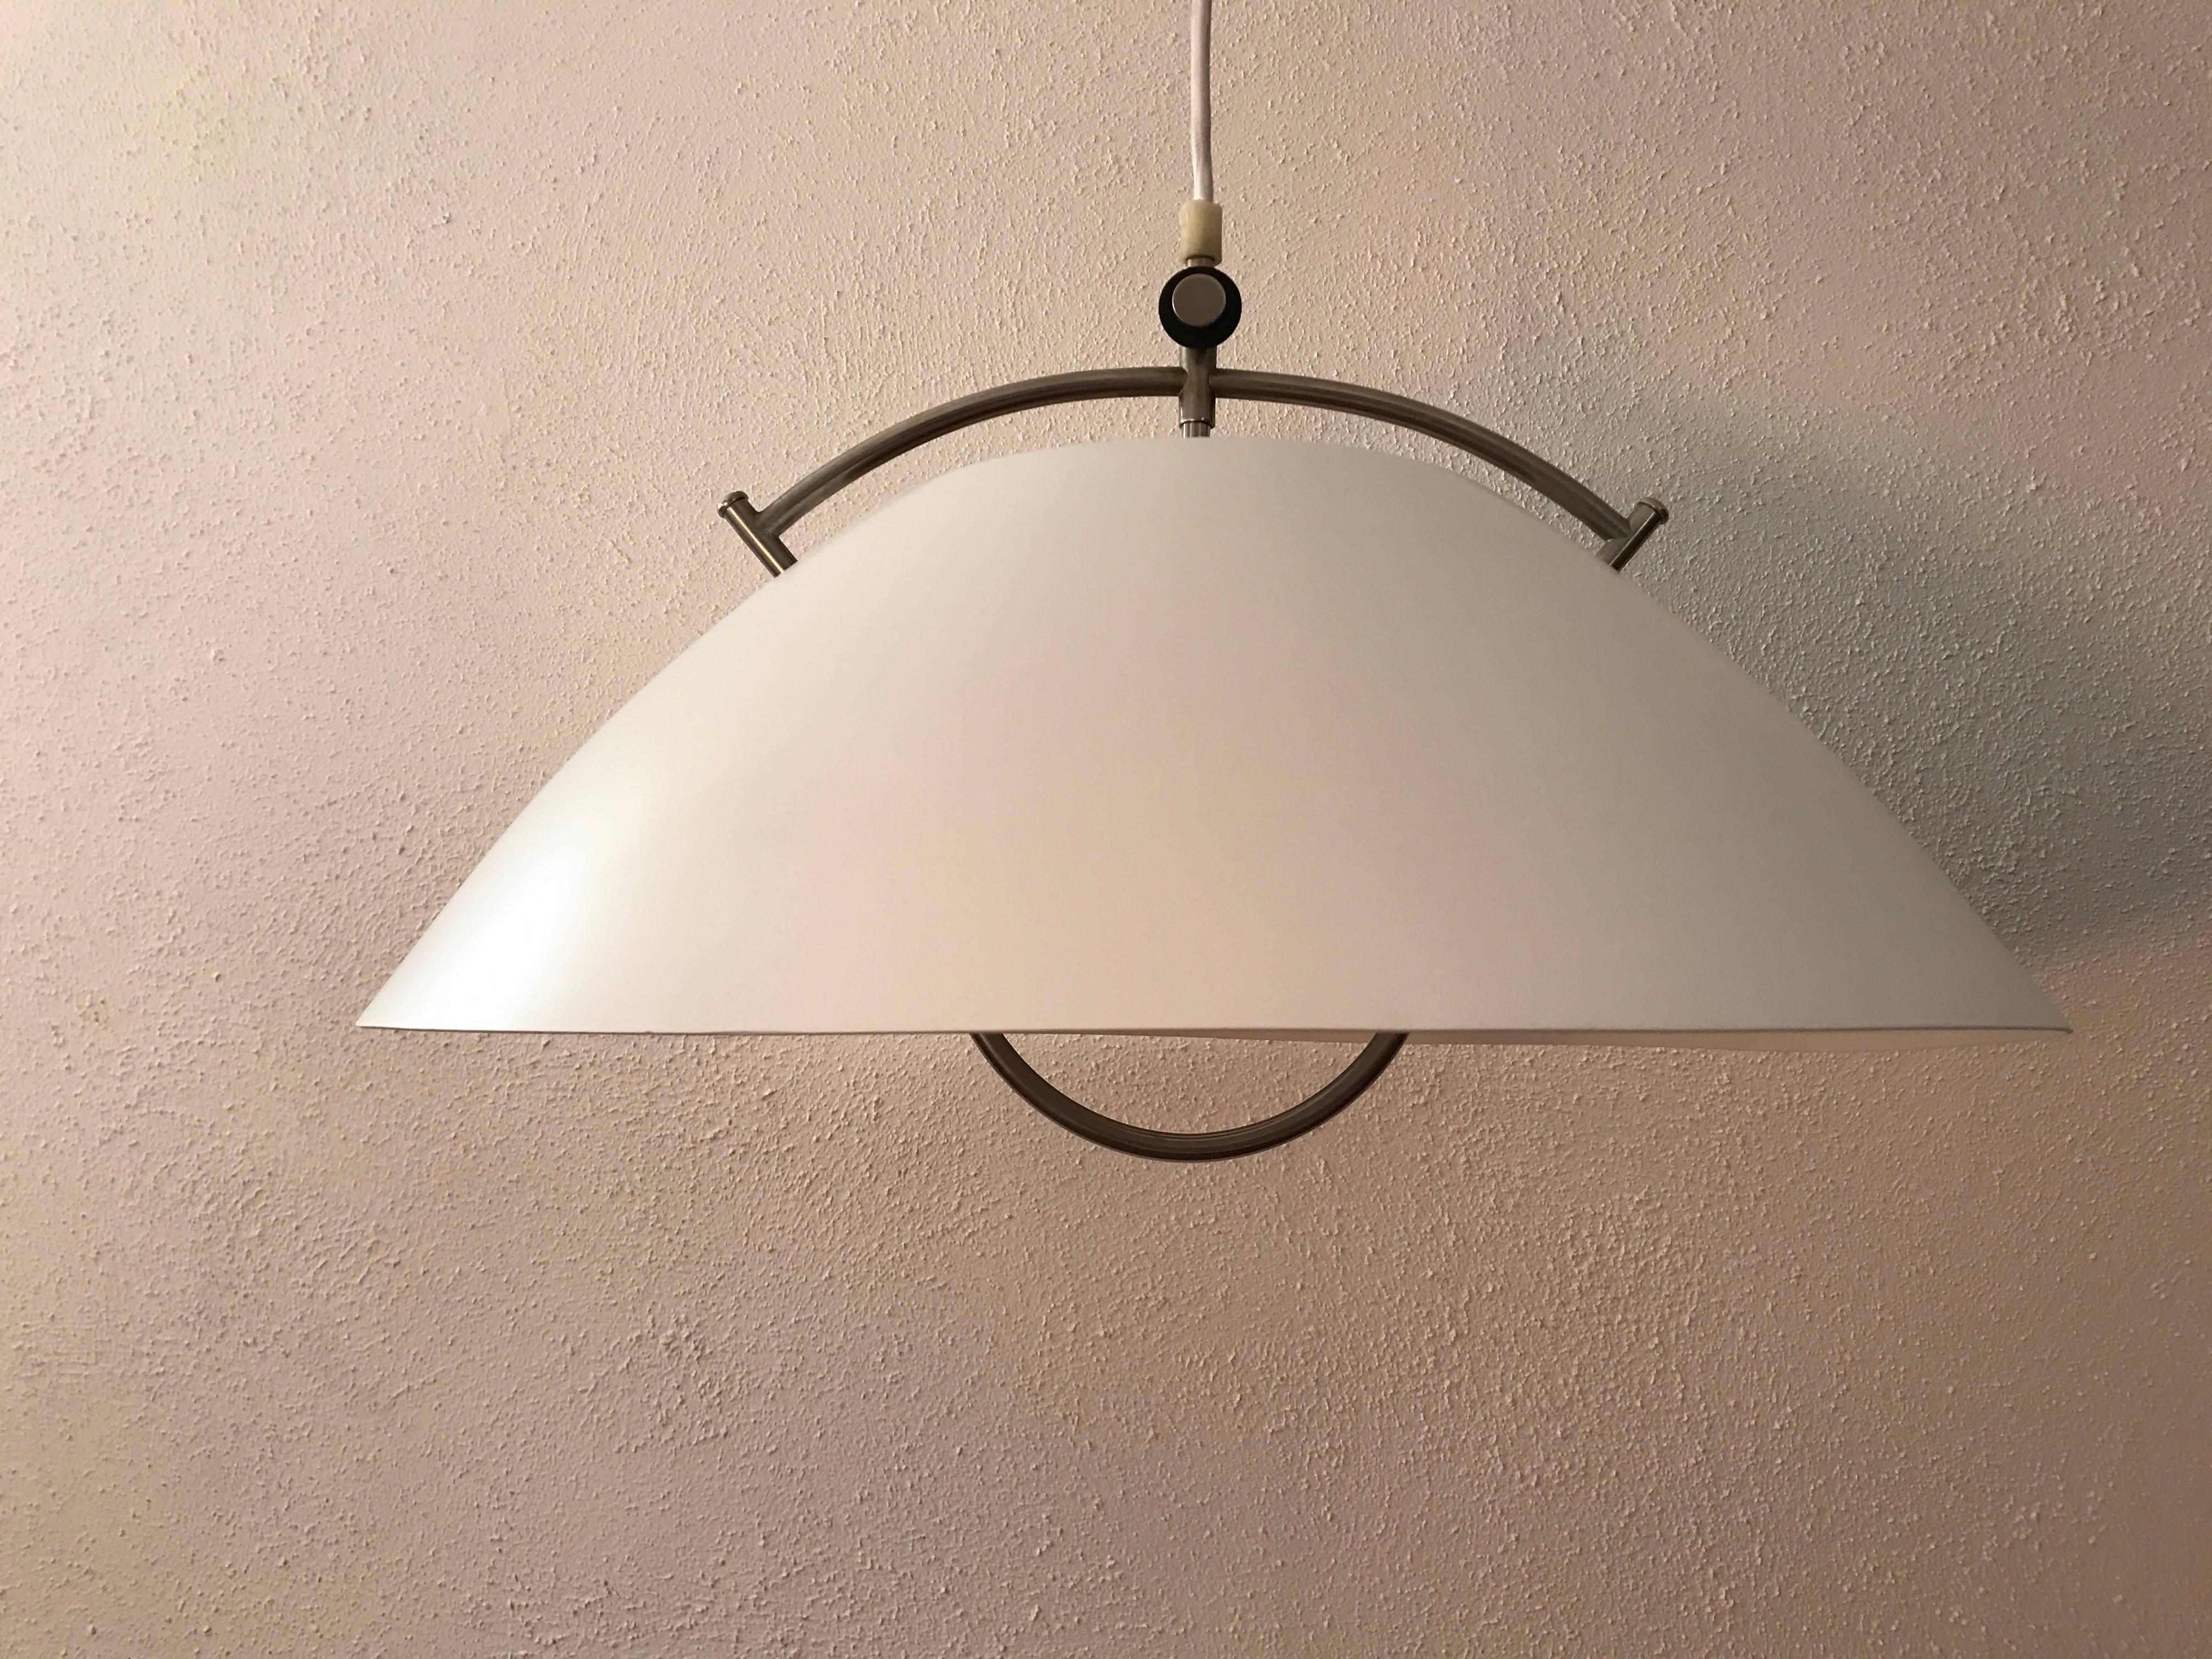 Late 20th century Louis Poulsen The Pendant by Hans J. Wegner.
A very nice pendant lamp most likely made in the 1970s or 1980s, its in a fantastic condition, without any damages or marks. The diameter is 51cm and the height is 32cm plus cable and